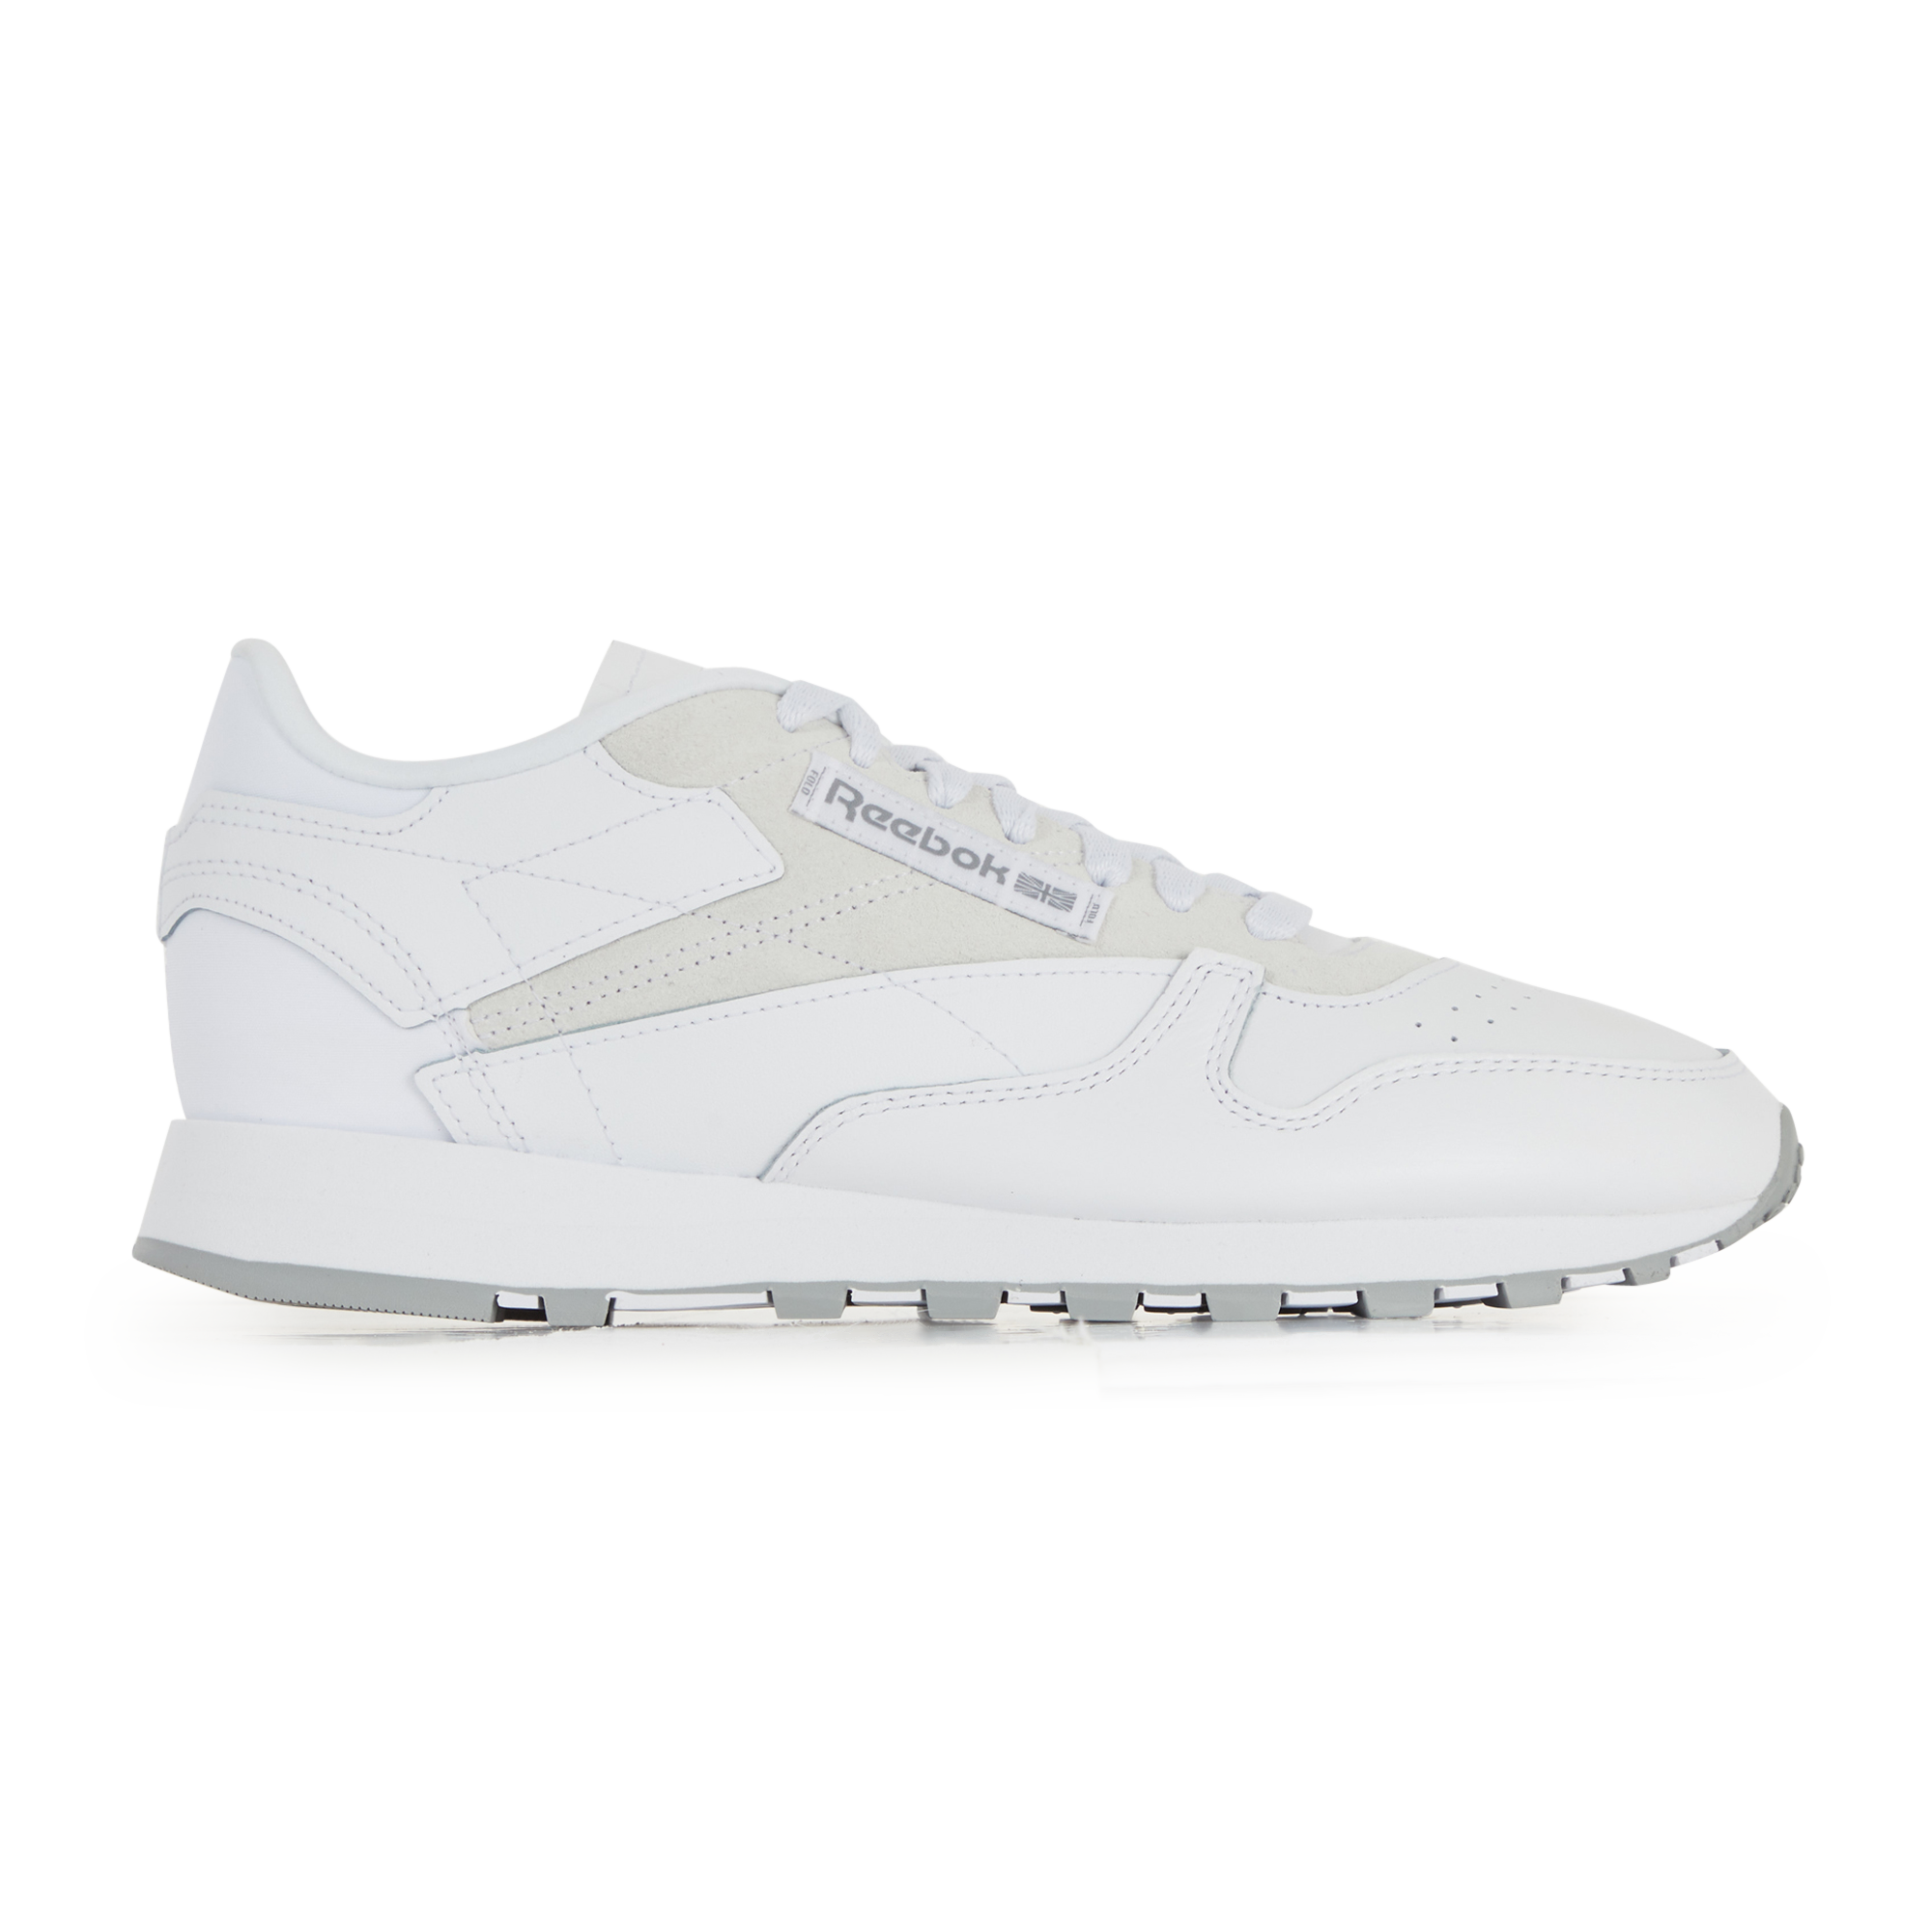 REEBOK CLASSIC MAKE IT YOURS BLANCO | Courir.es